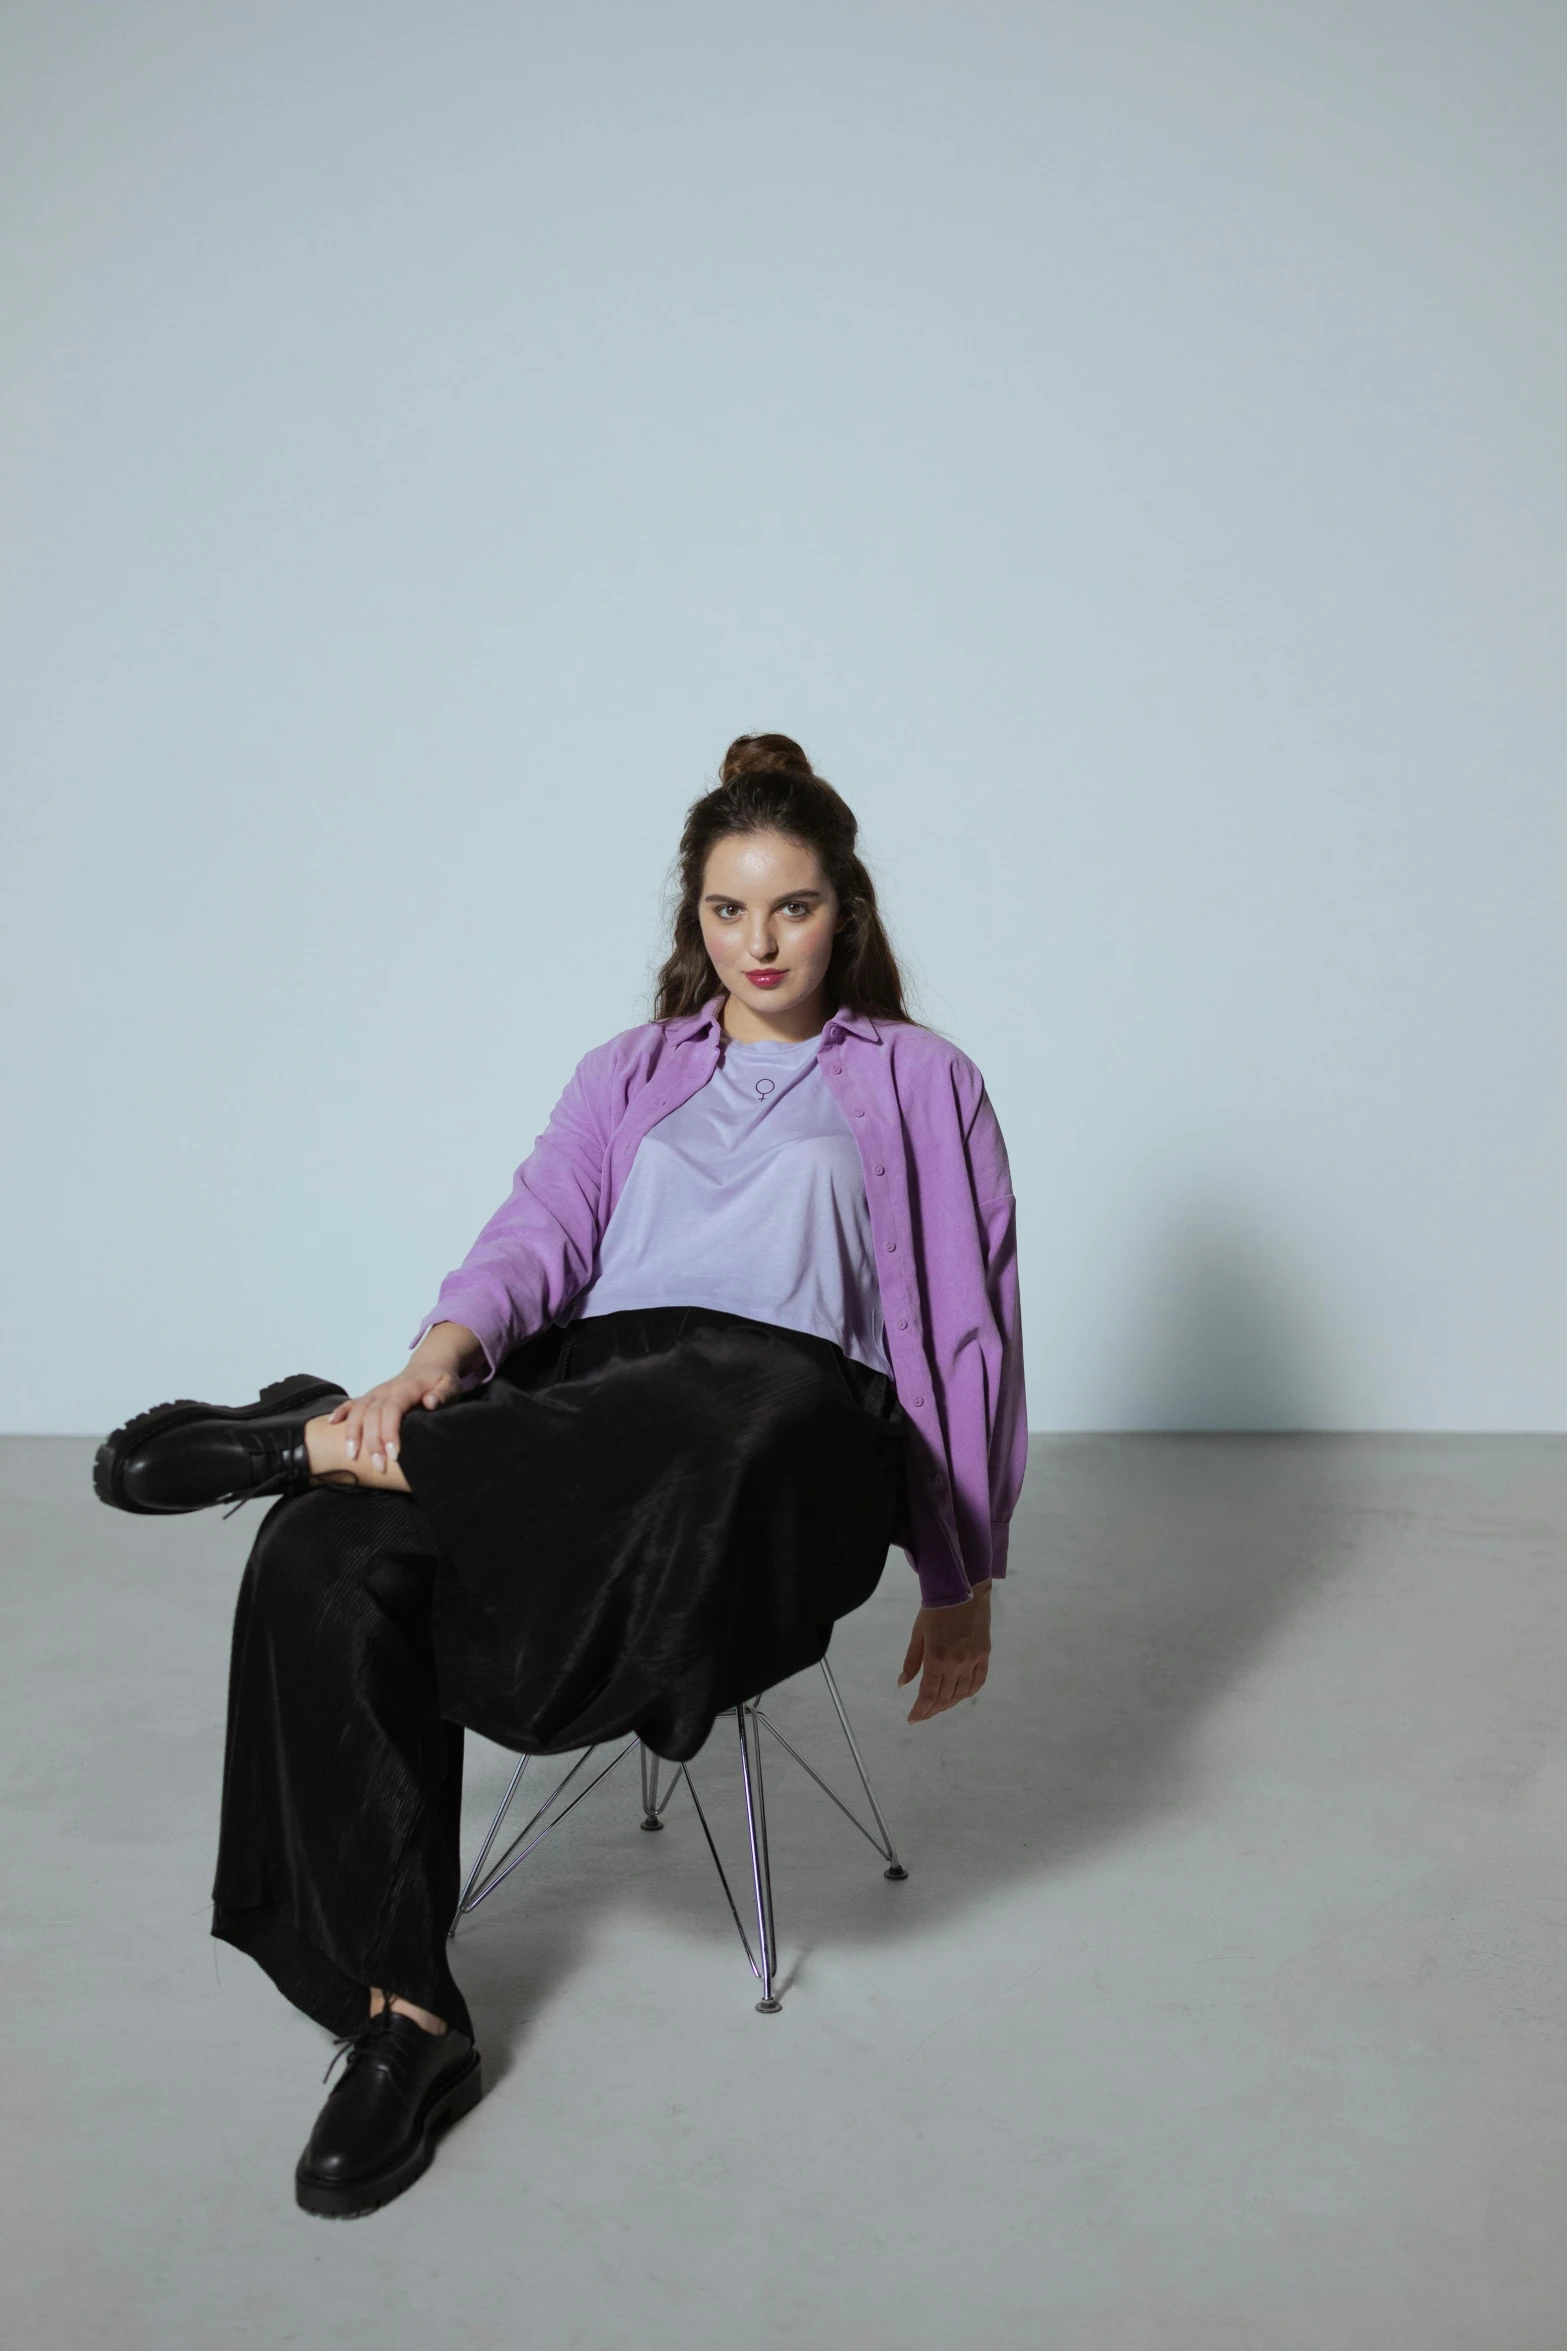 a woman sitting on a chair in a room, an album cover, unsplash, realism, wearing a purple sweatsuit, portrait sophie mudd, ((purple)), pastel clothing